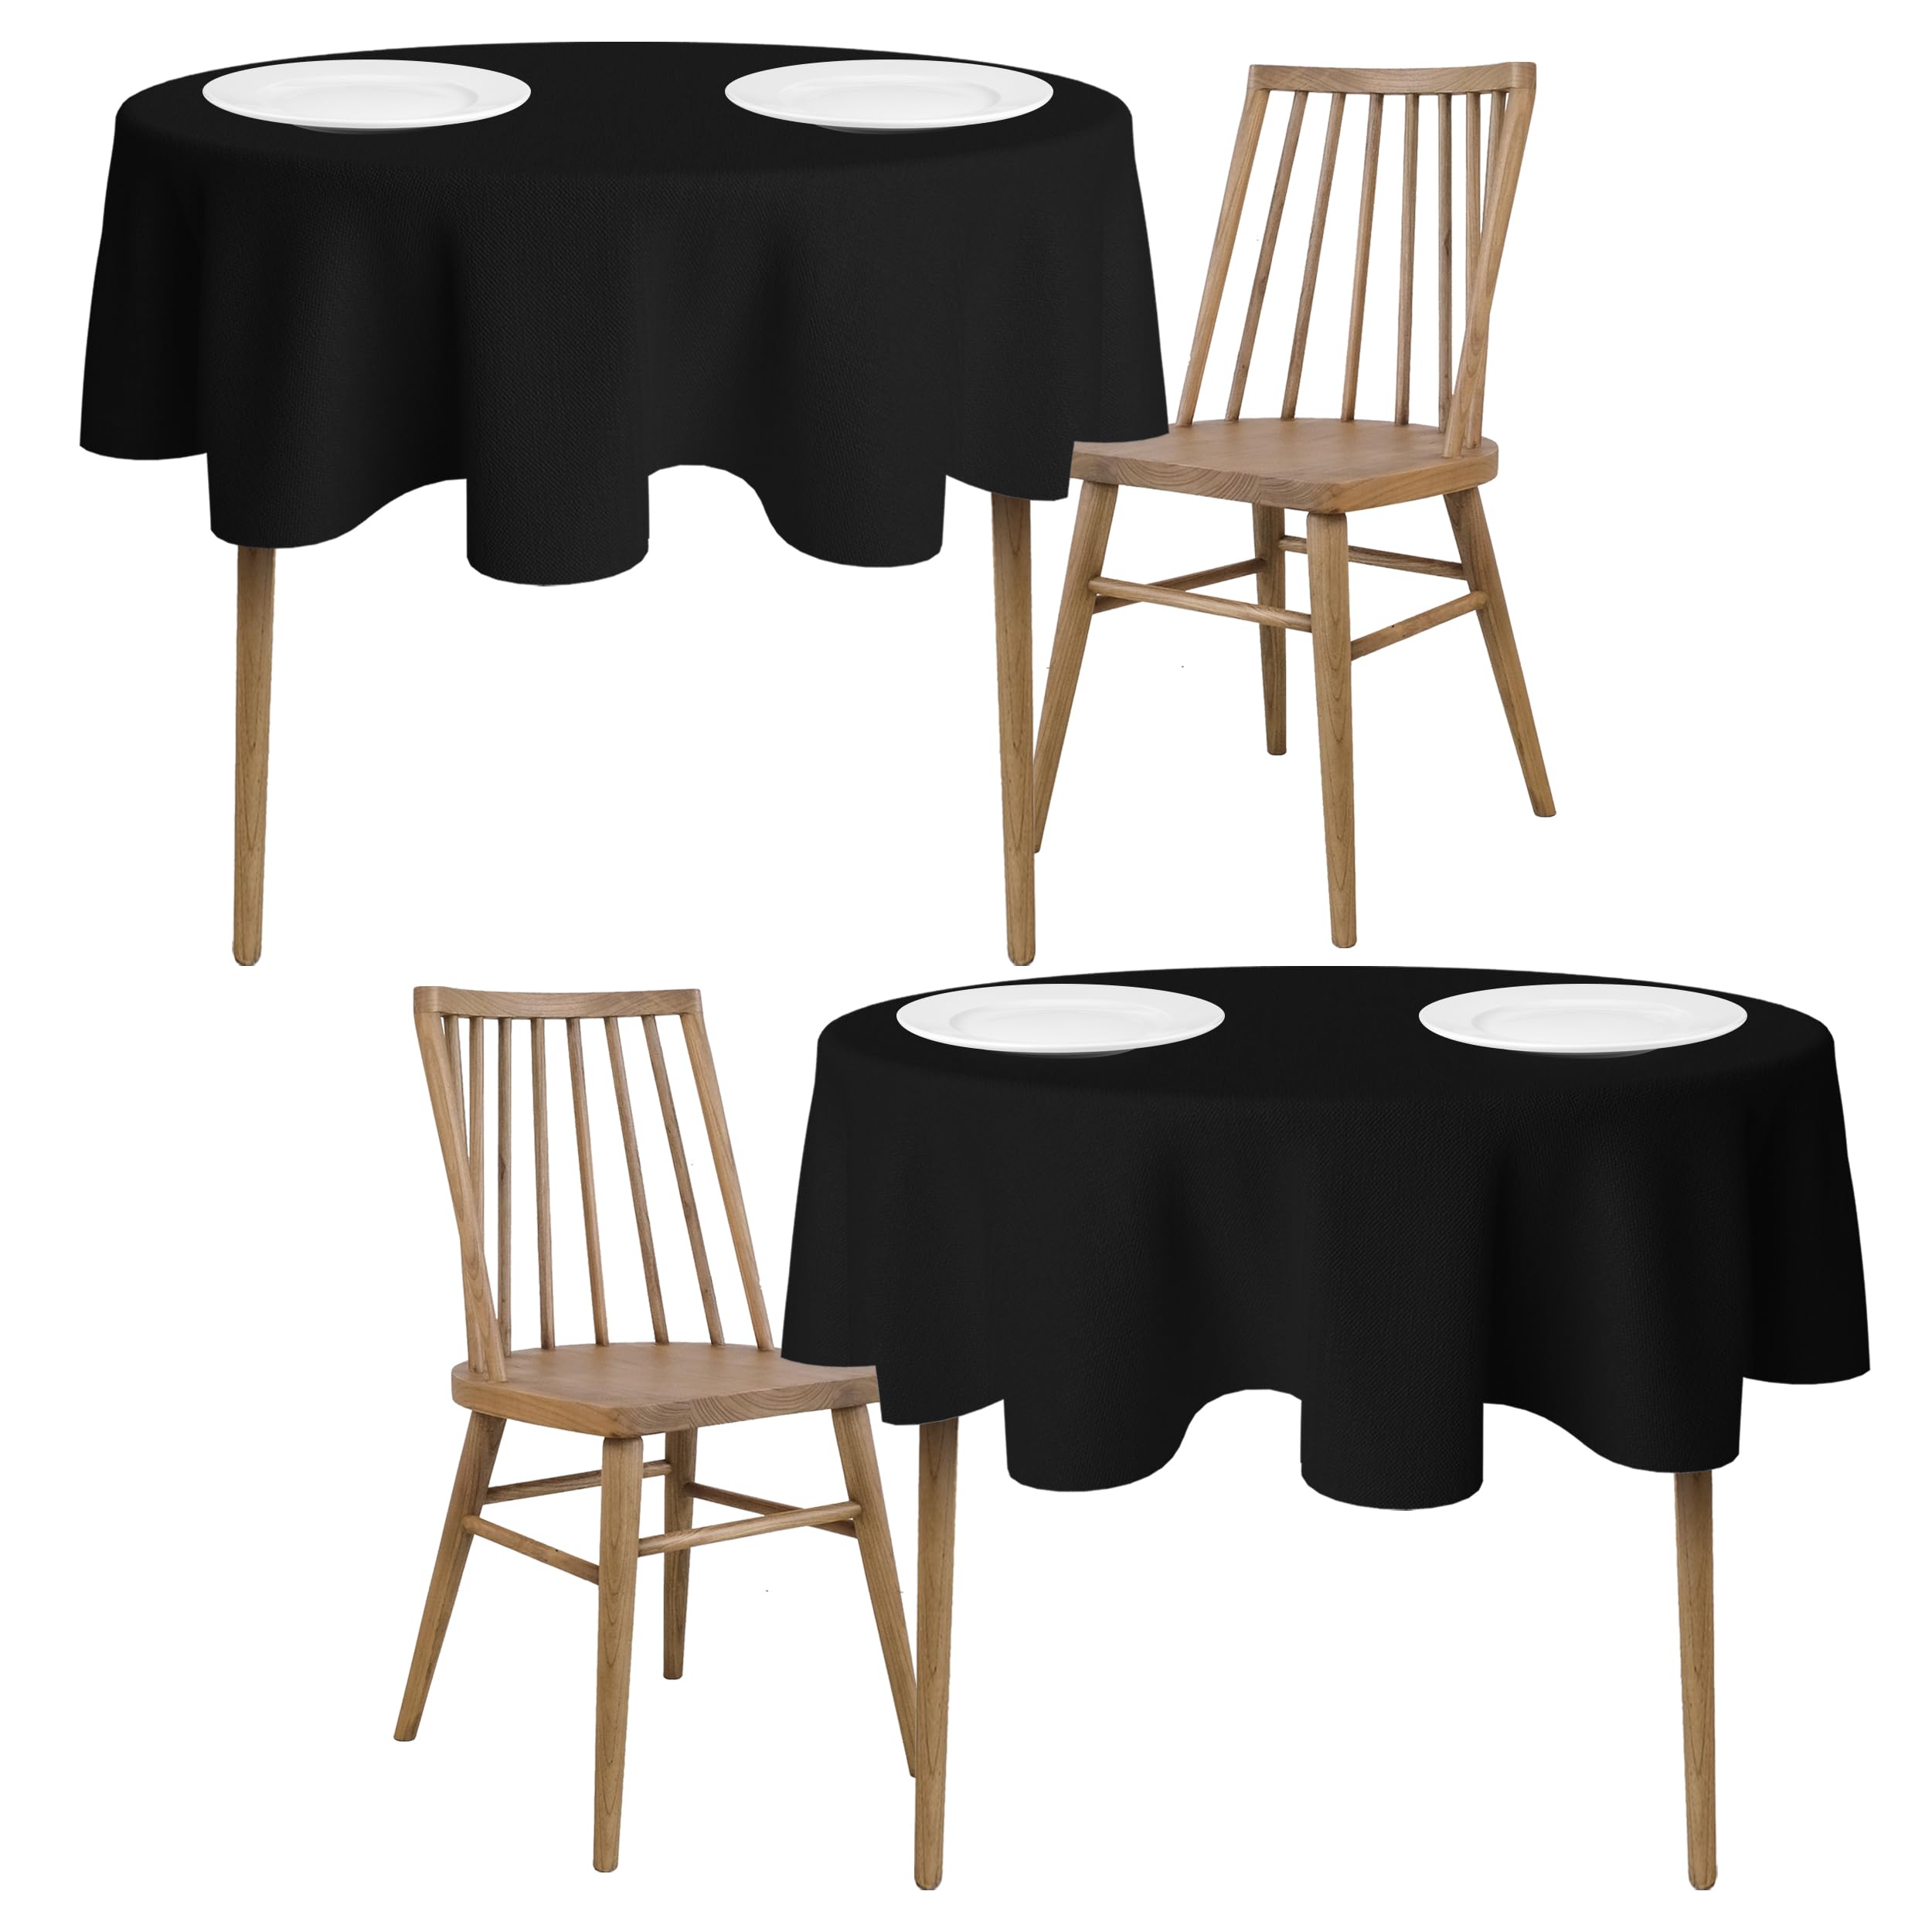 [2 Pack] 60" Round Premium Tablecloths for Wedding | Banquet | Restaurant | Washable Fabric Table Cloth  - Very Good